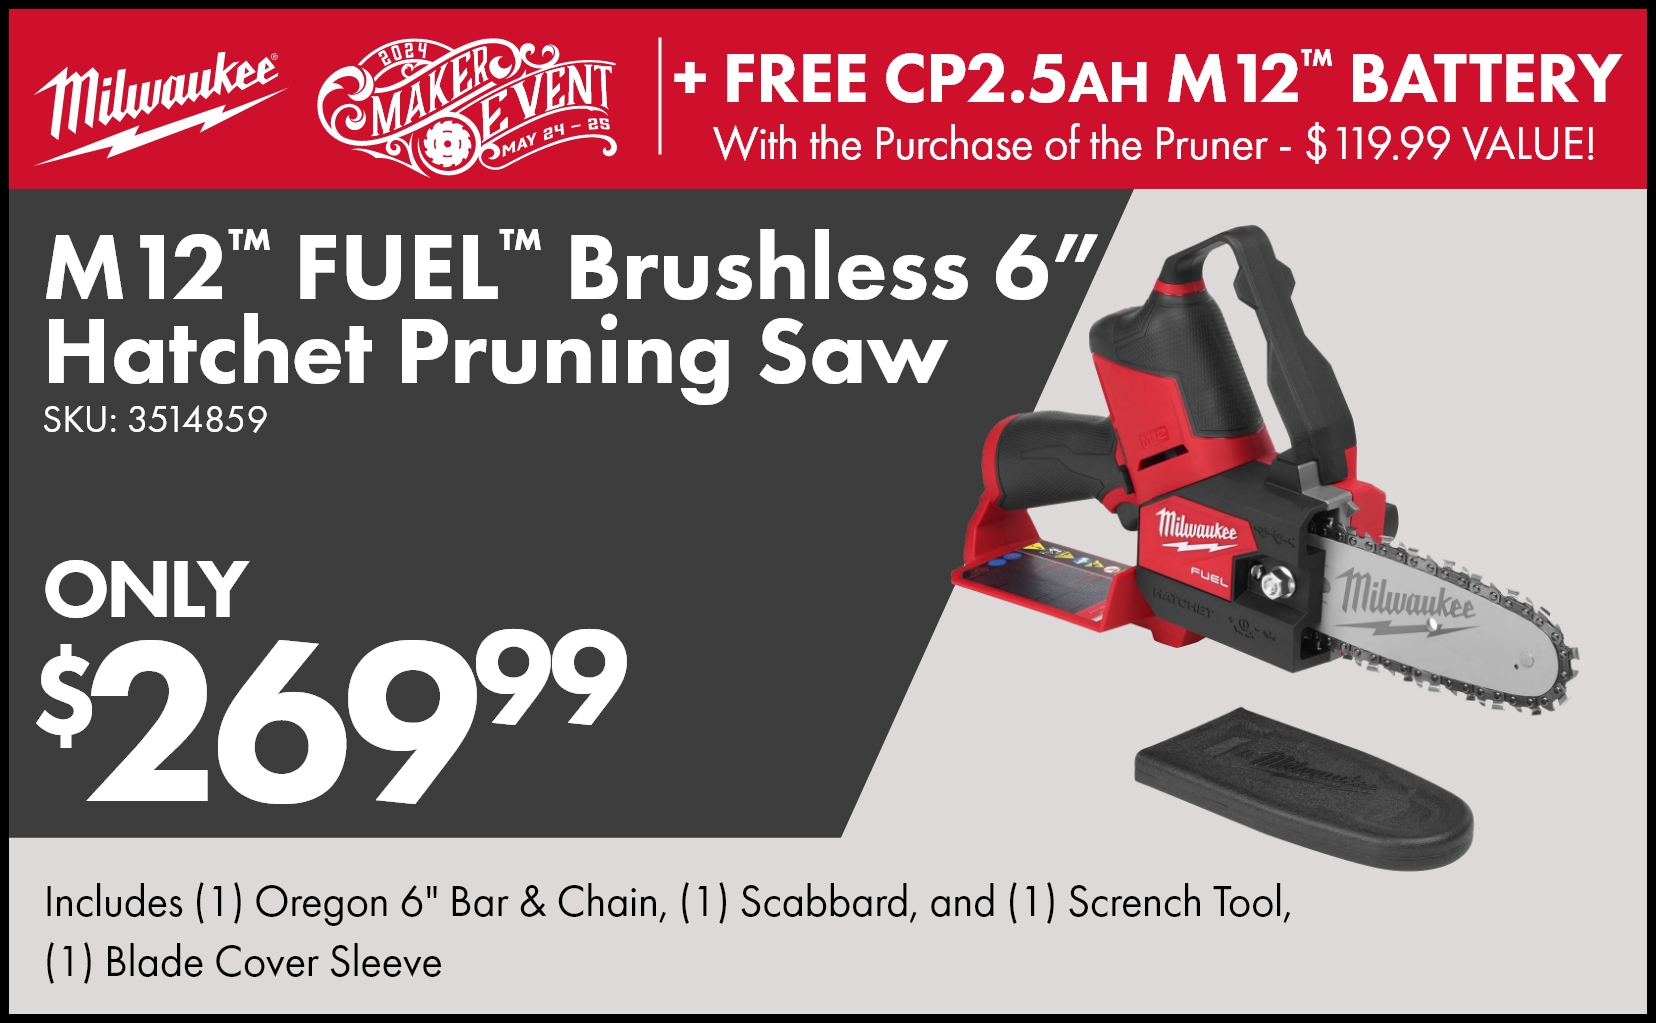 Purchase the Milwaukee® M12 Fuel Brushless 6” Hatchet Pruning Saw and get the Milwaukee® CP2.5AH M12® High Output Battery for FREE!